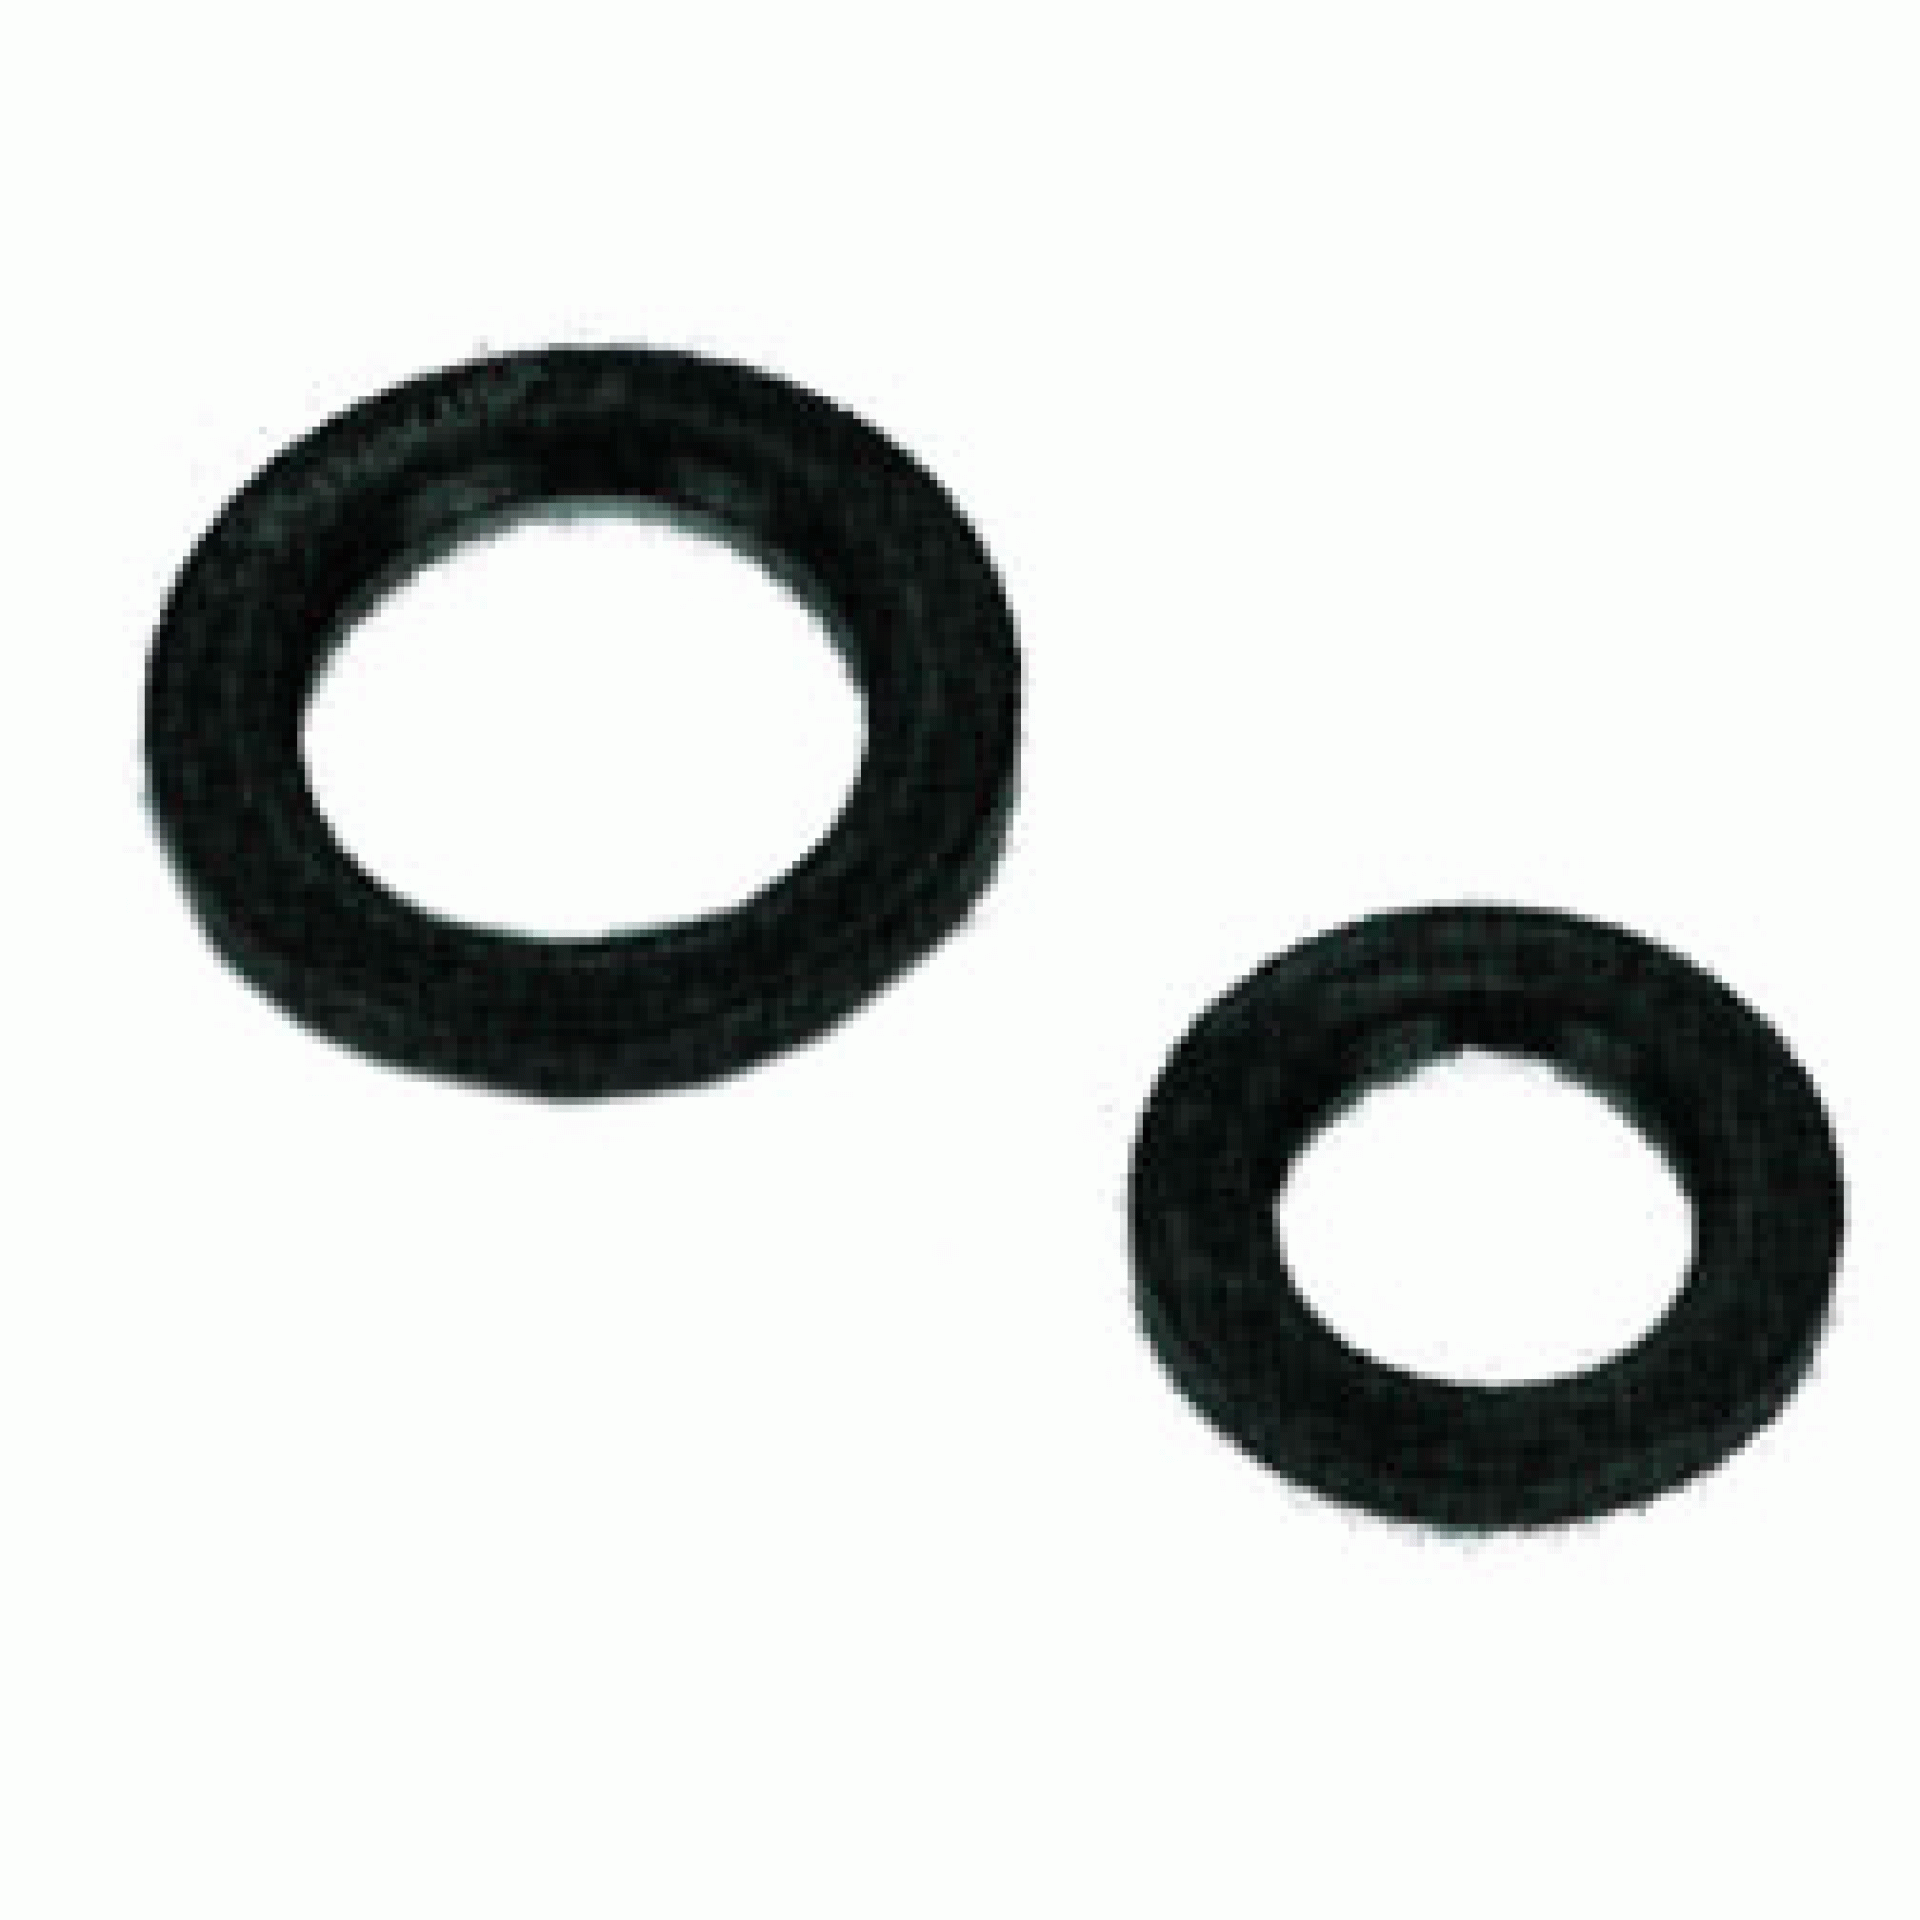 DEXTER AXLE CO. | 010-042-00 | GREASE SEAL